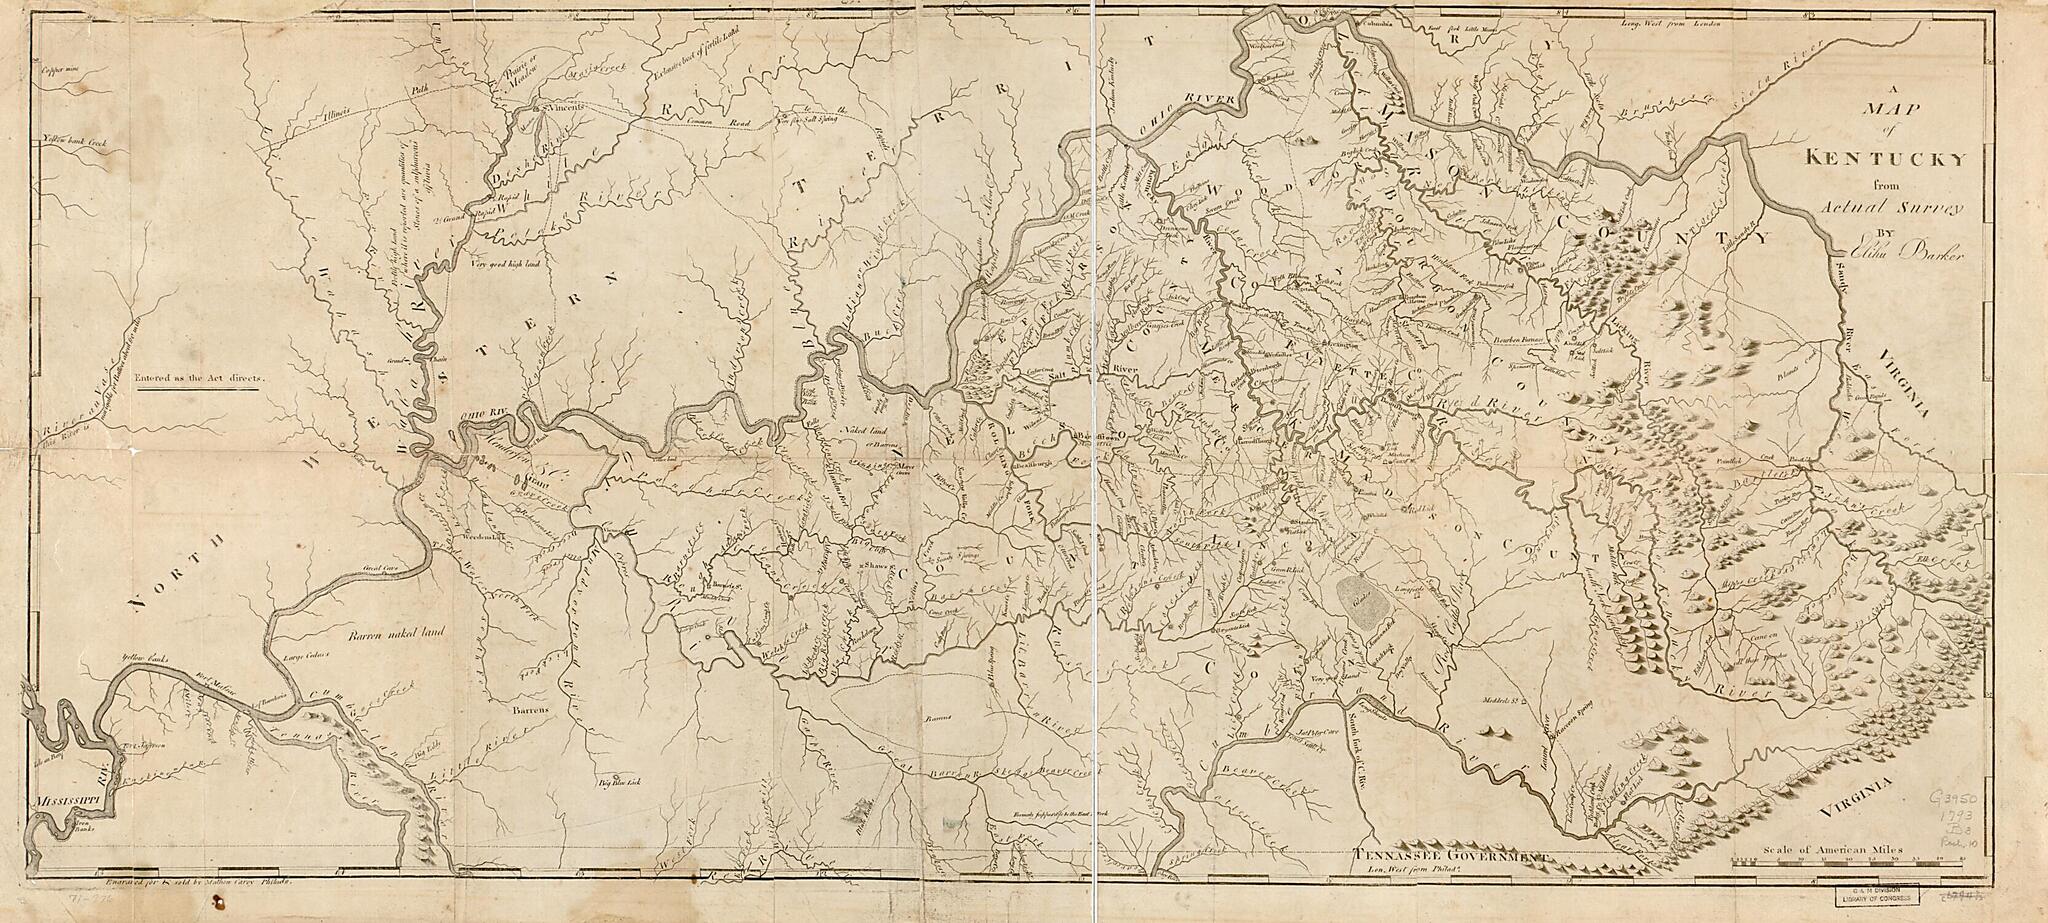 This old map of A Map of Kentucky from Actual Survey from 1793 was created by Elihu Barker, Mathew Carey in 1793